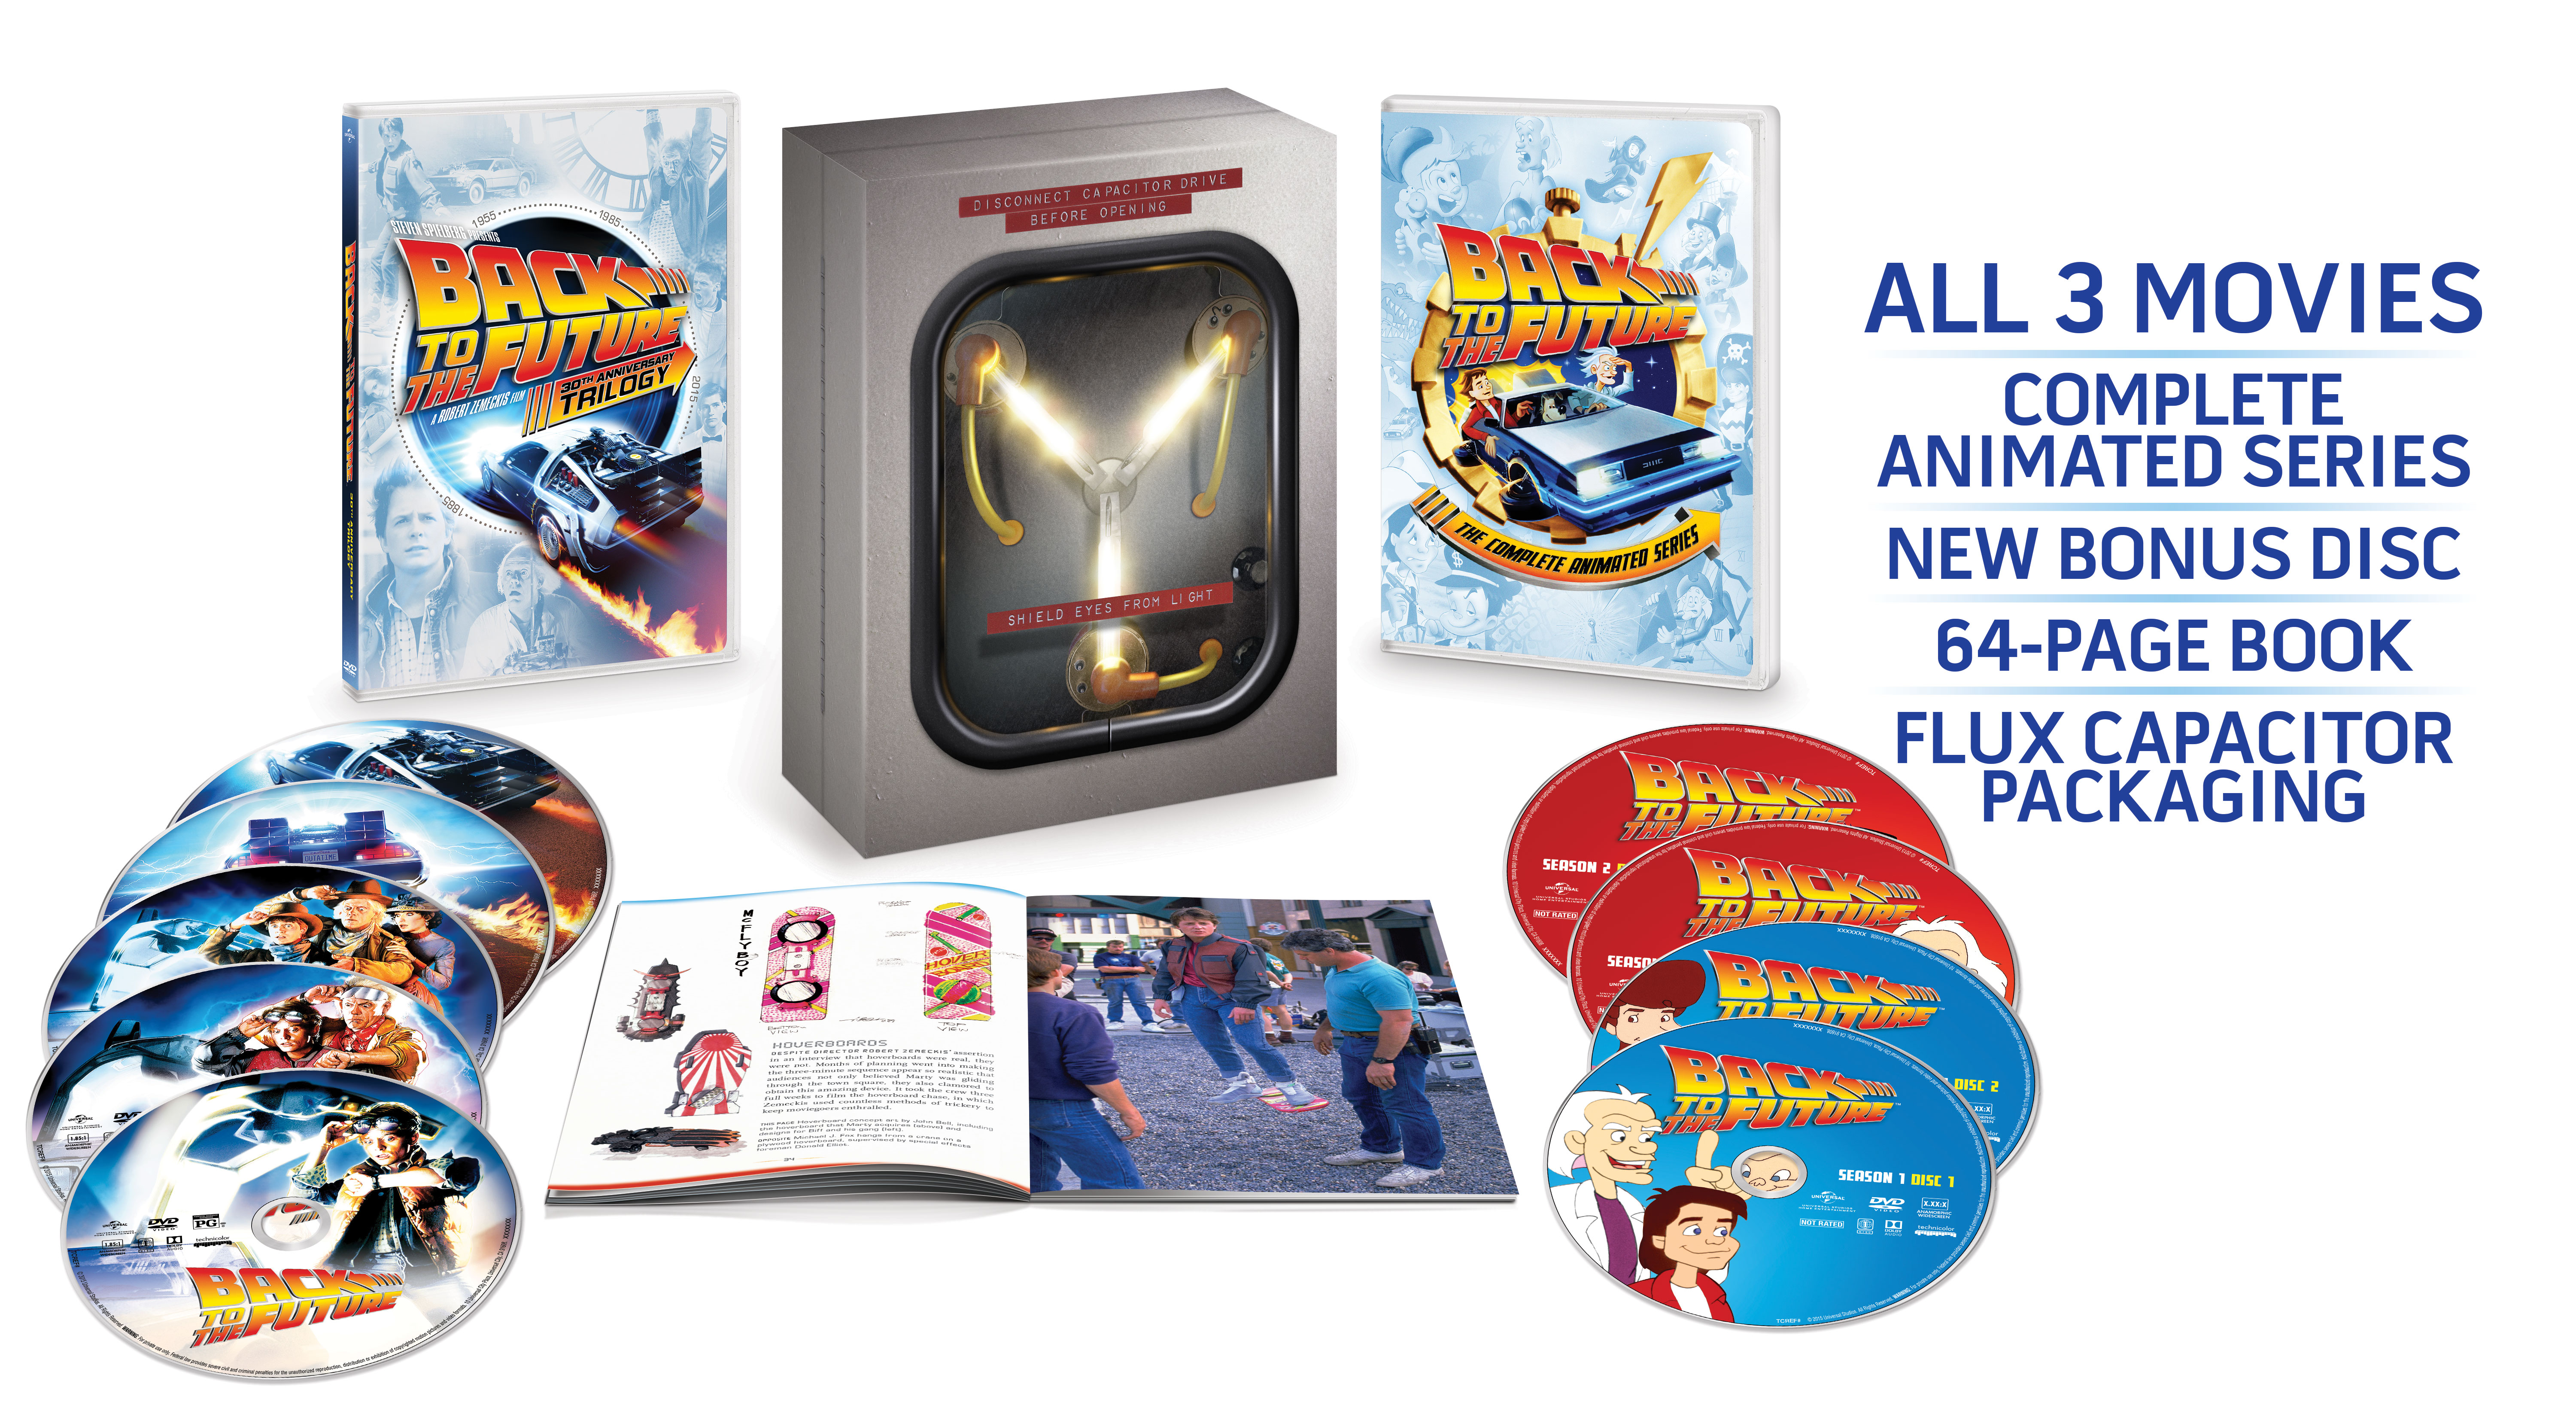 back-to-the-future-trilogy-30th-anniversary-blu-ray-flux-capacitor.0.jpg